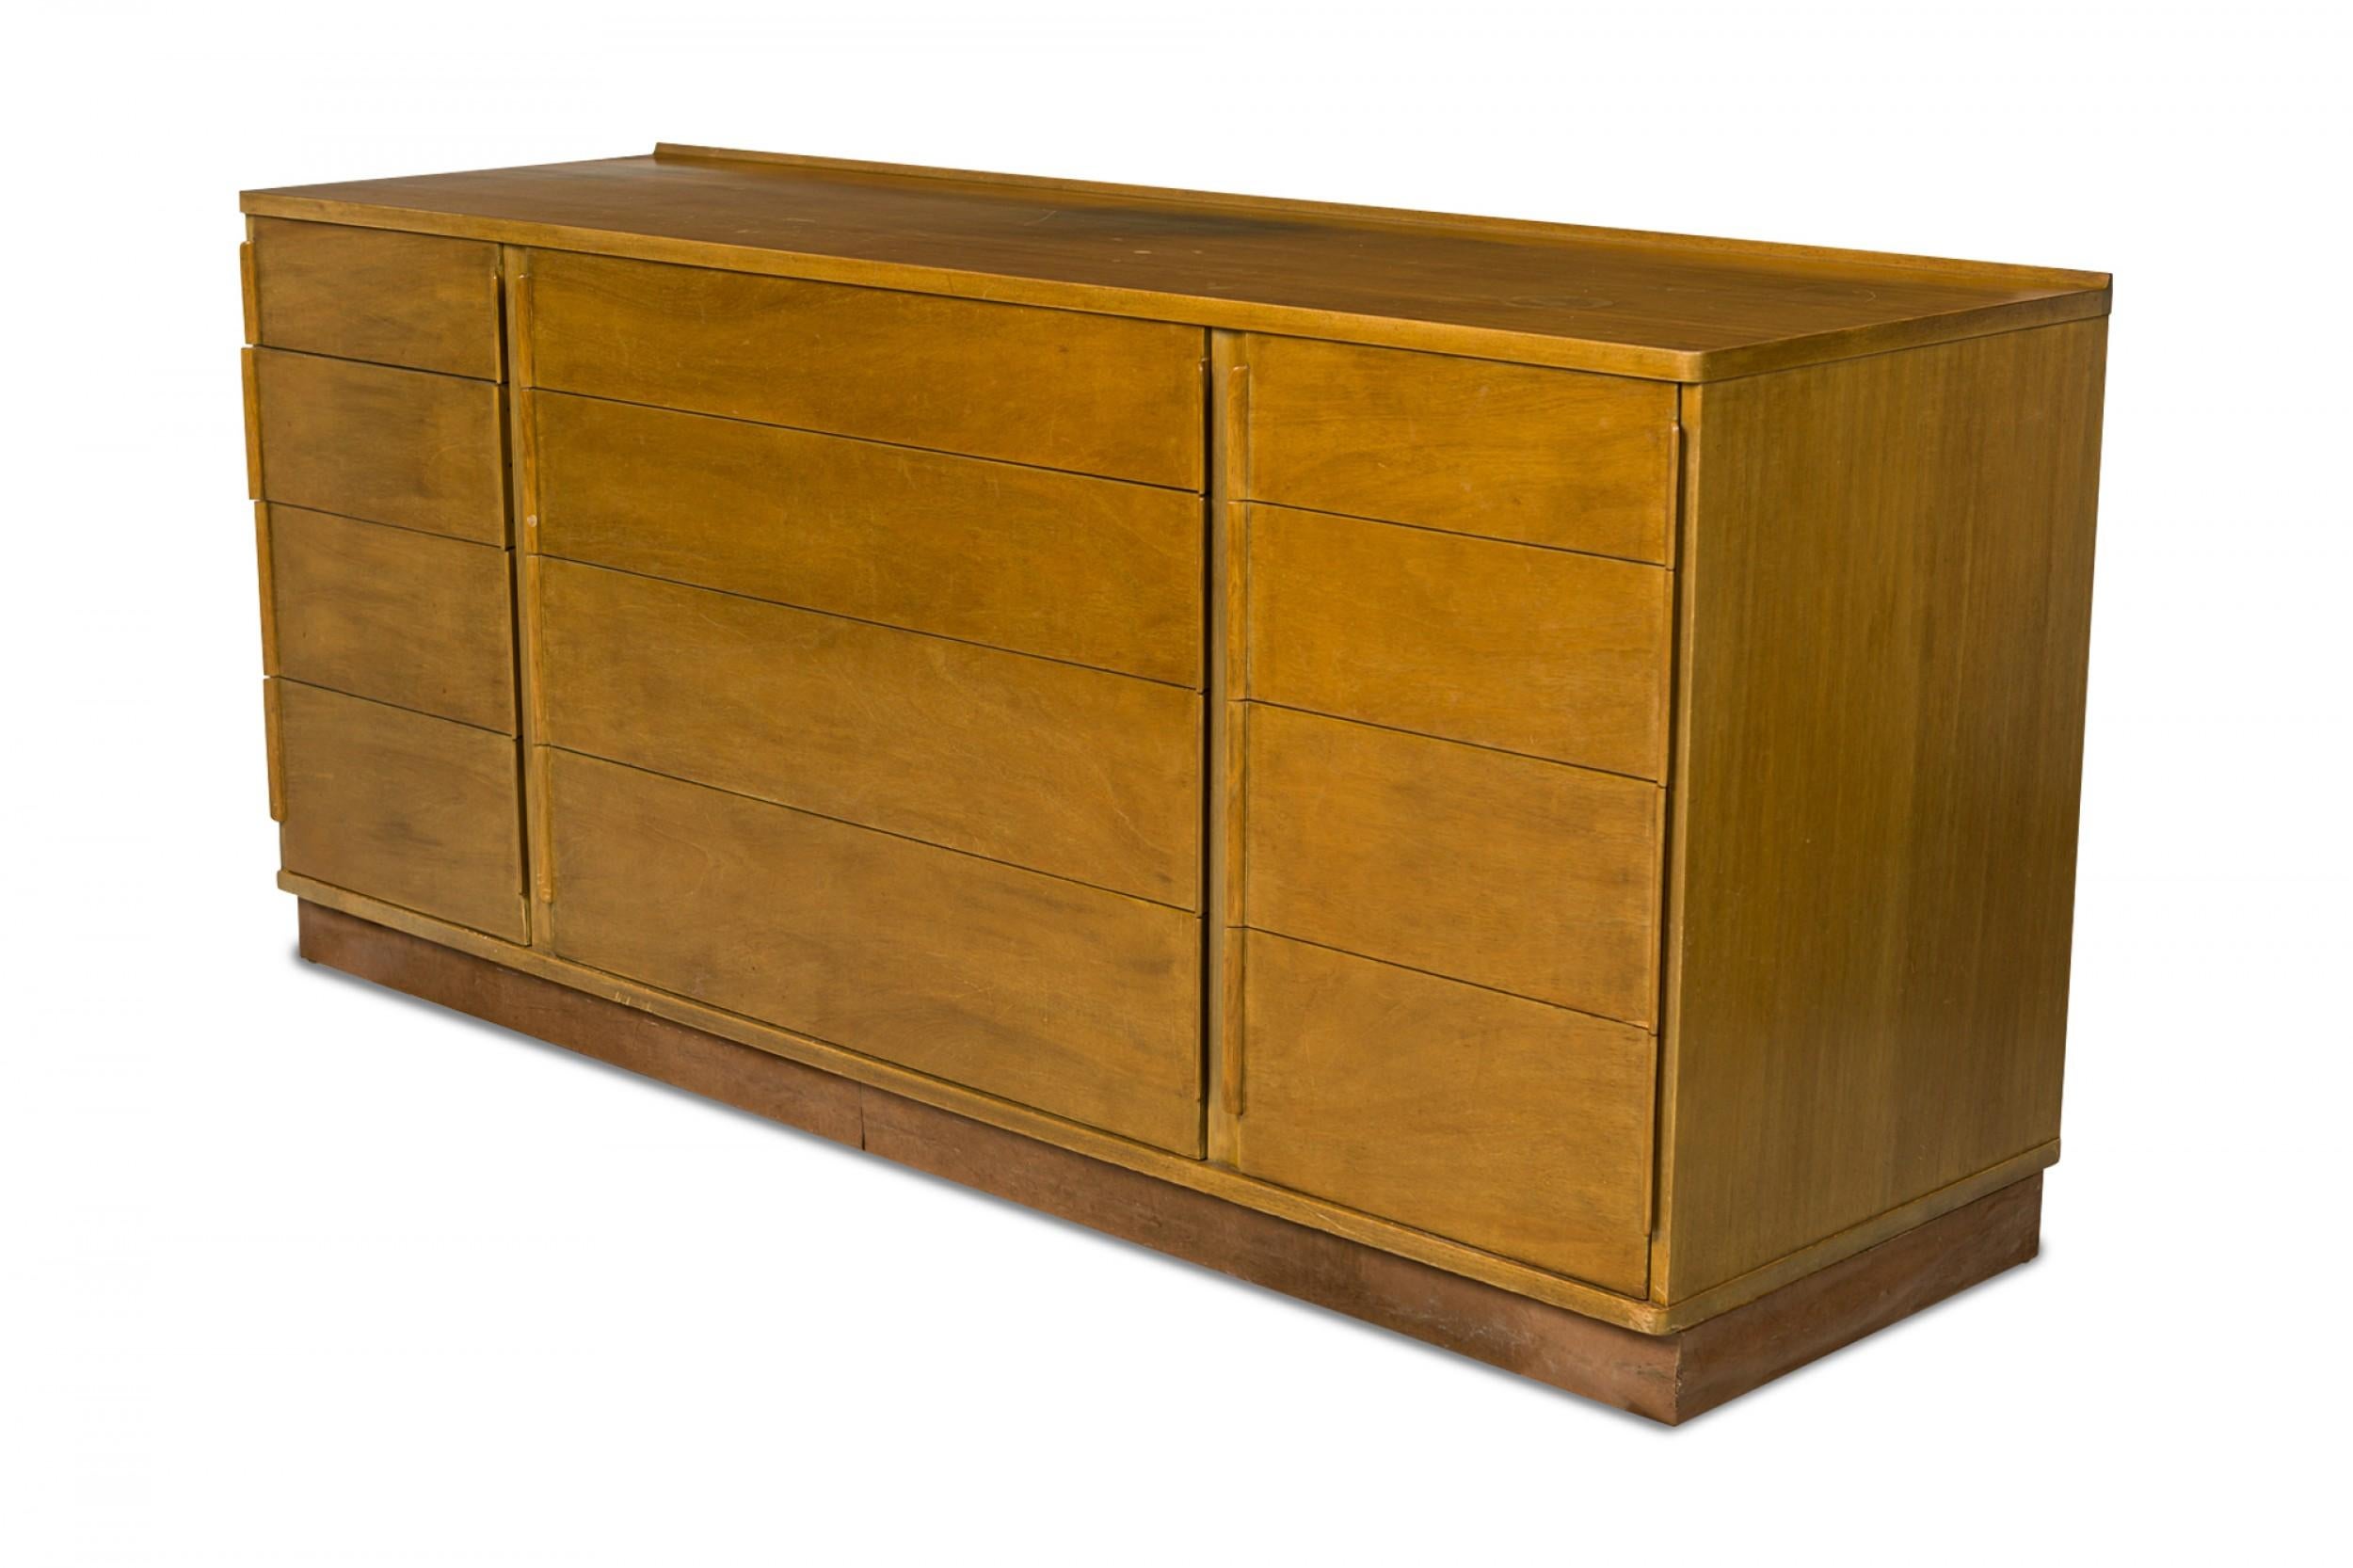 American mid-century walnut low chest of drawers with three sets of four drawers, one set wider and central, flanked on either side by two narrower sets of drawers. (EDWARD WORMLEY FOR DUNBAR FURNITURE CO.)